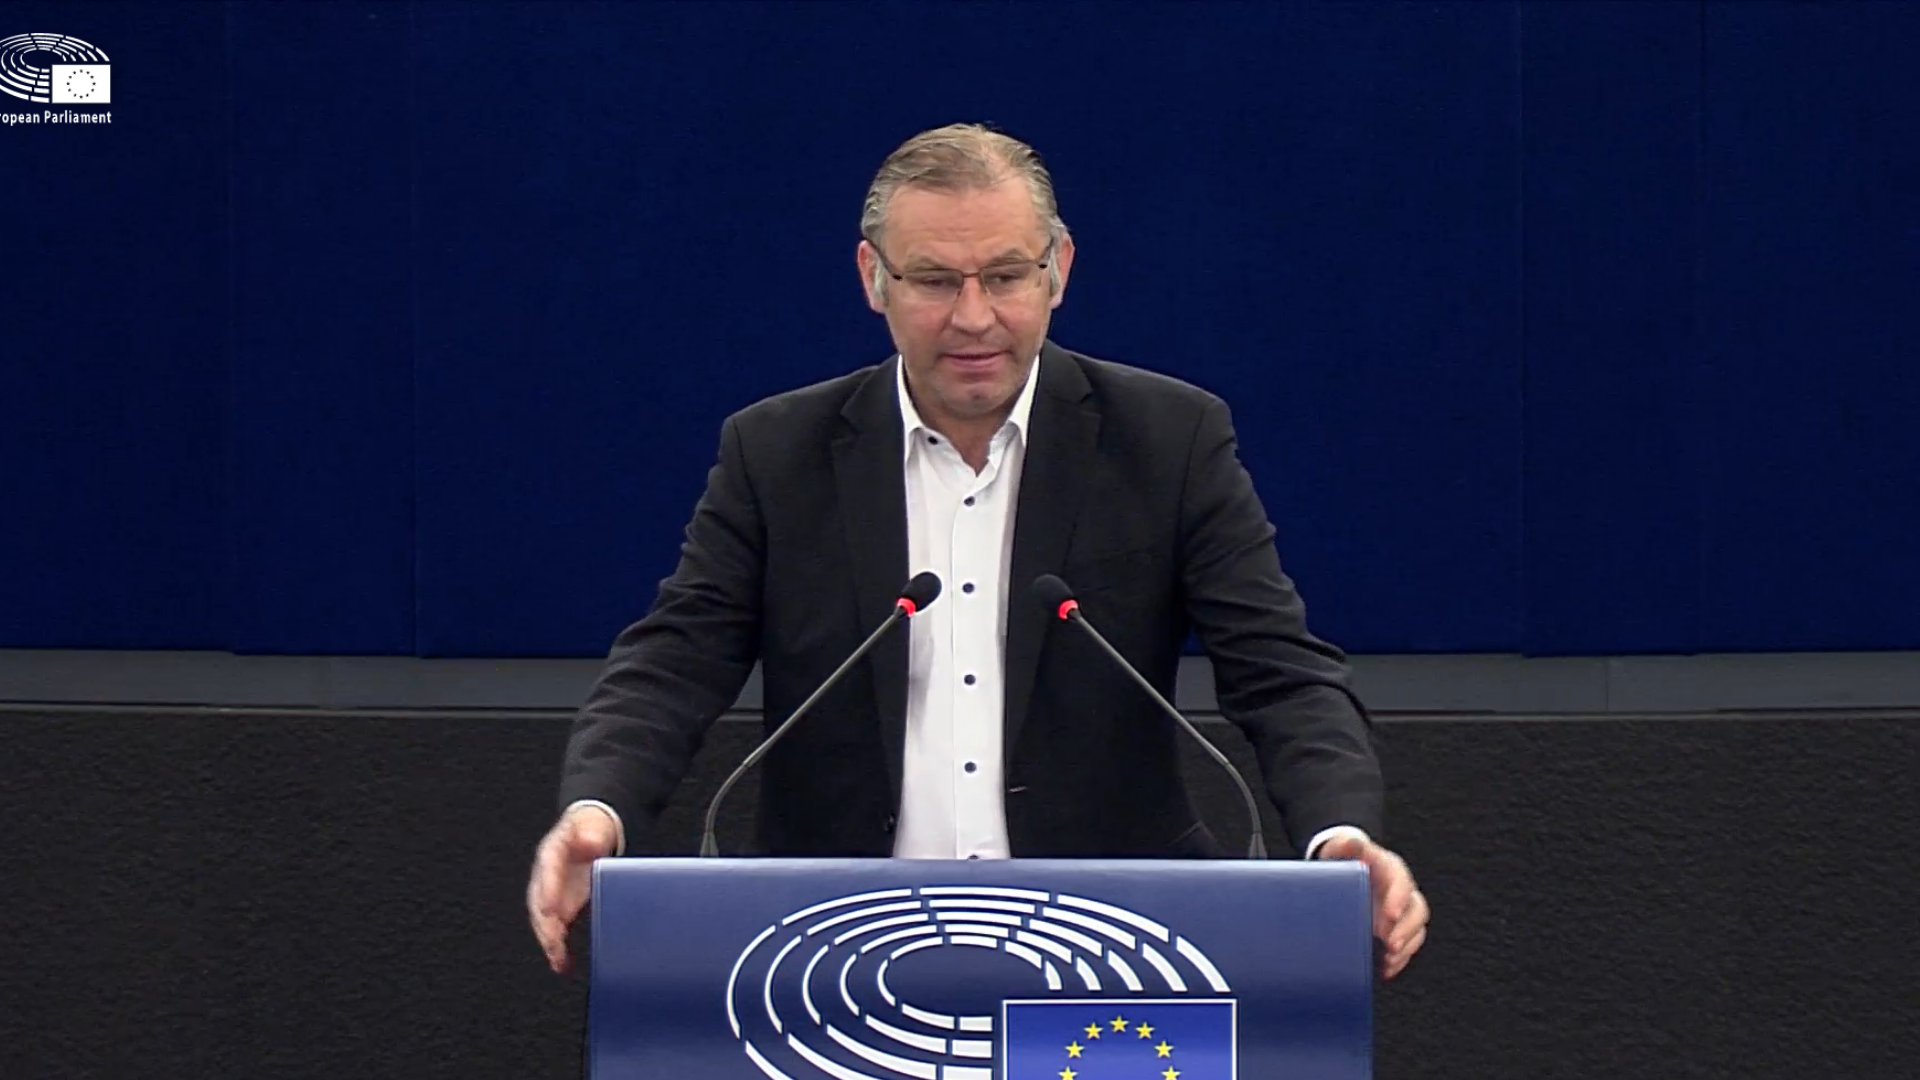 Still from video, grey haired man stands in centre at podium decorated with EU flag, dark blue background